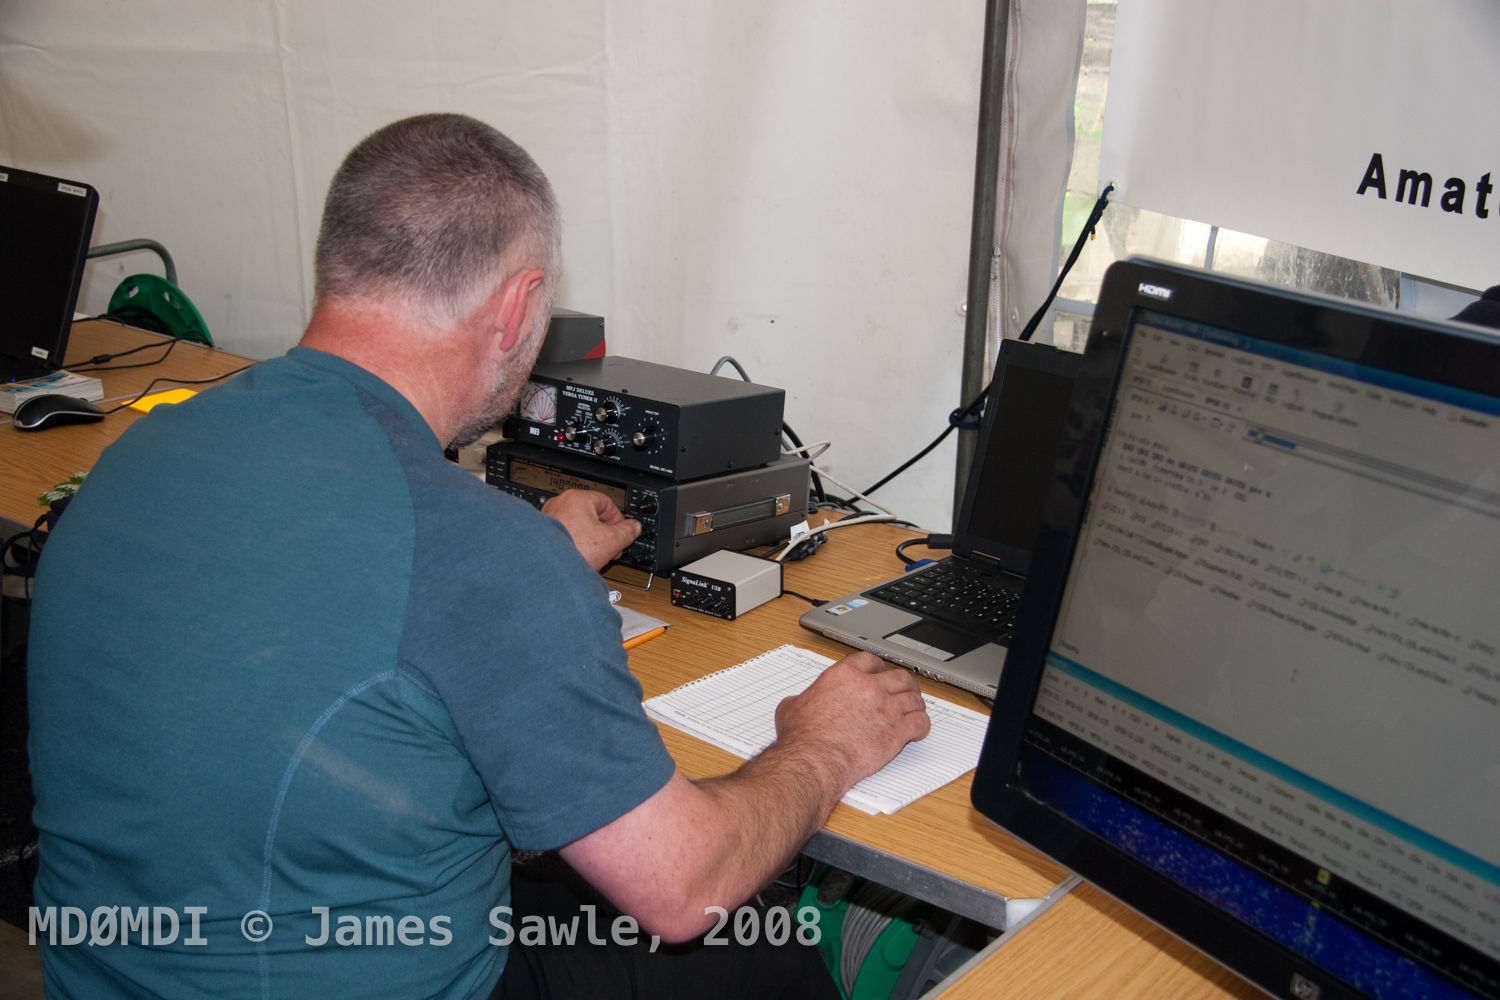 Steve Kelly (GD7DUZ) running PSK31 Data Mode during the IOMARS GB5TD Tynwald Day Special Event station.